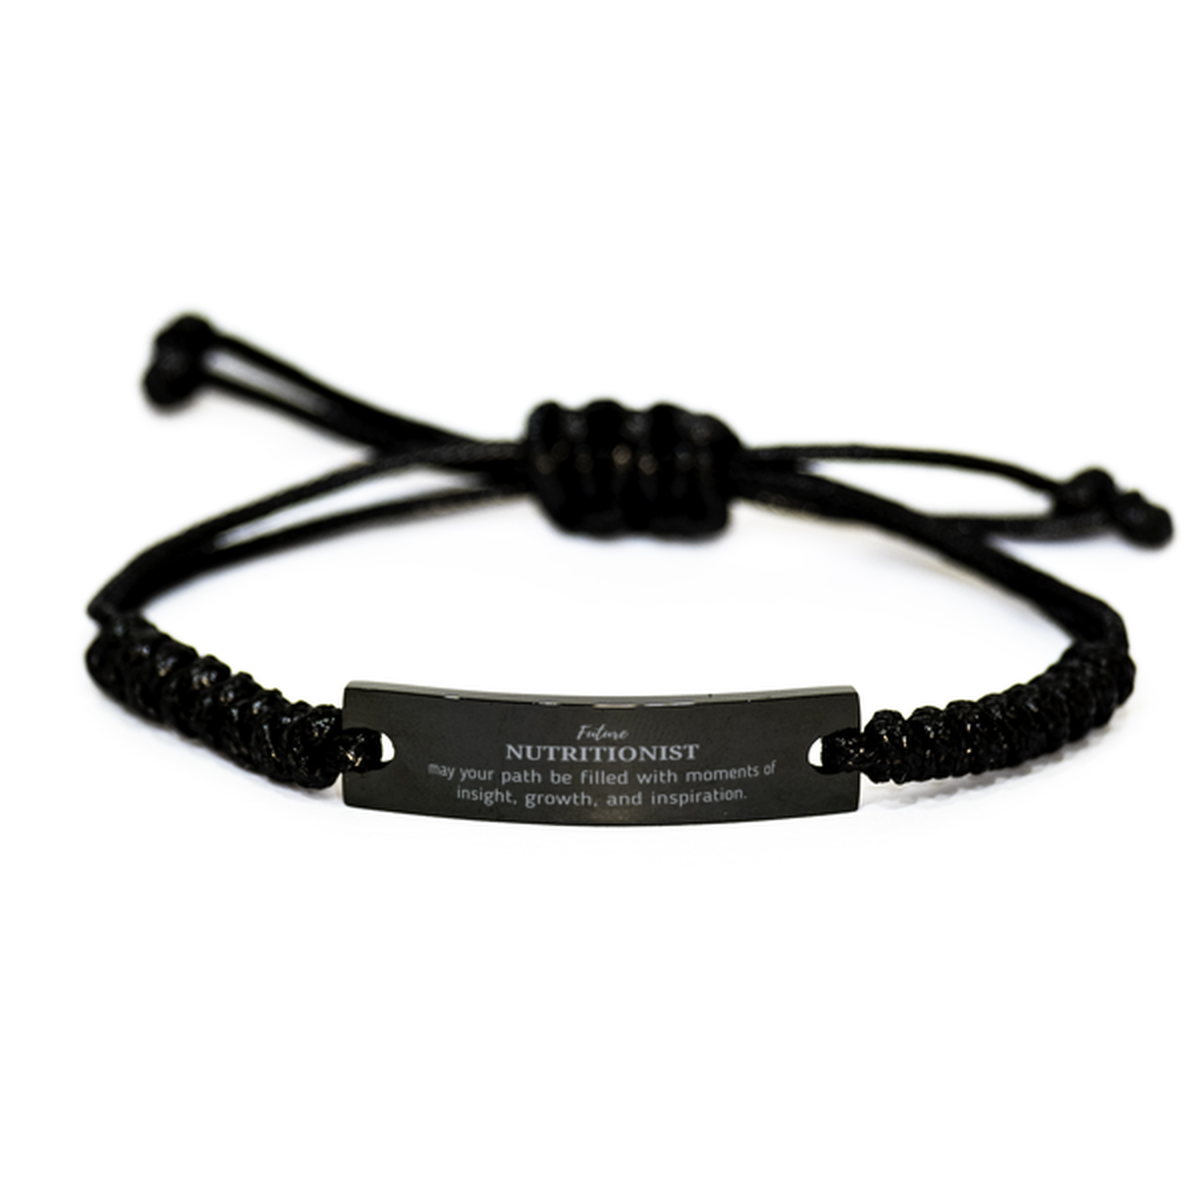 Future Nutritionist Gifts, May your path be filled with moments of insight, Graduation Gifts for New Nutritionist, Christmas Unique Black Rope Bracelet For Men, Women, Friends